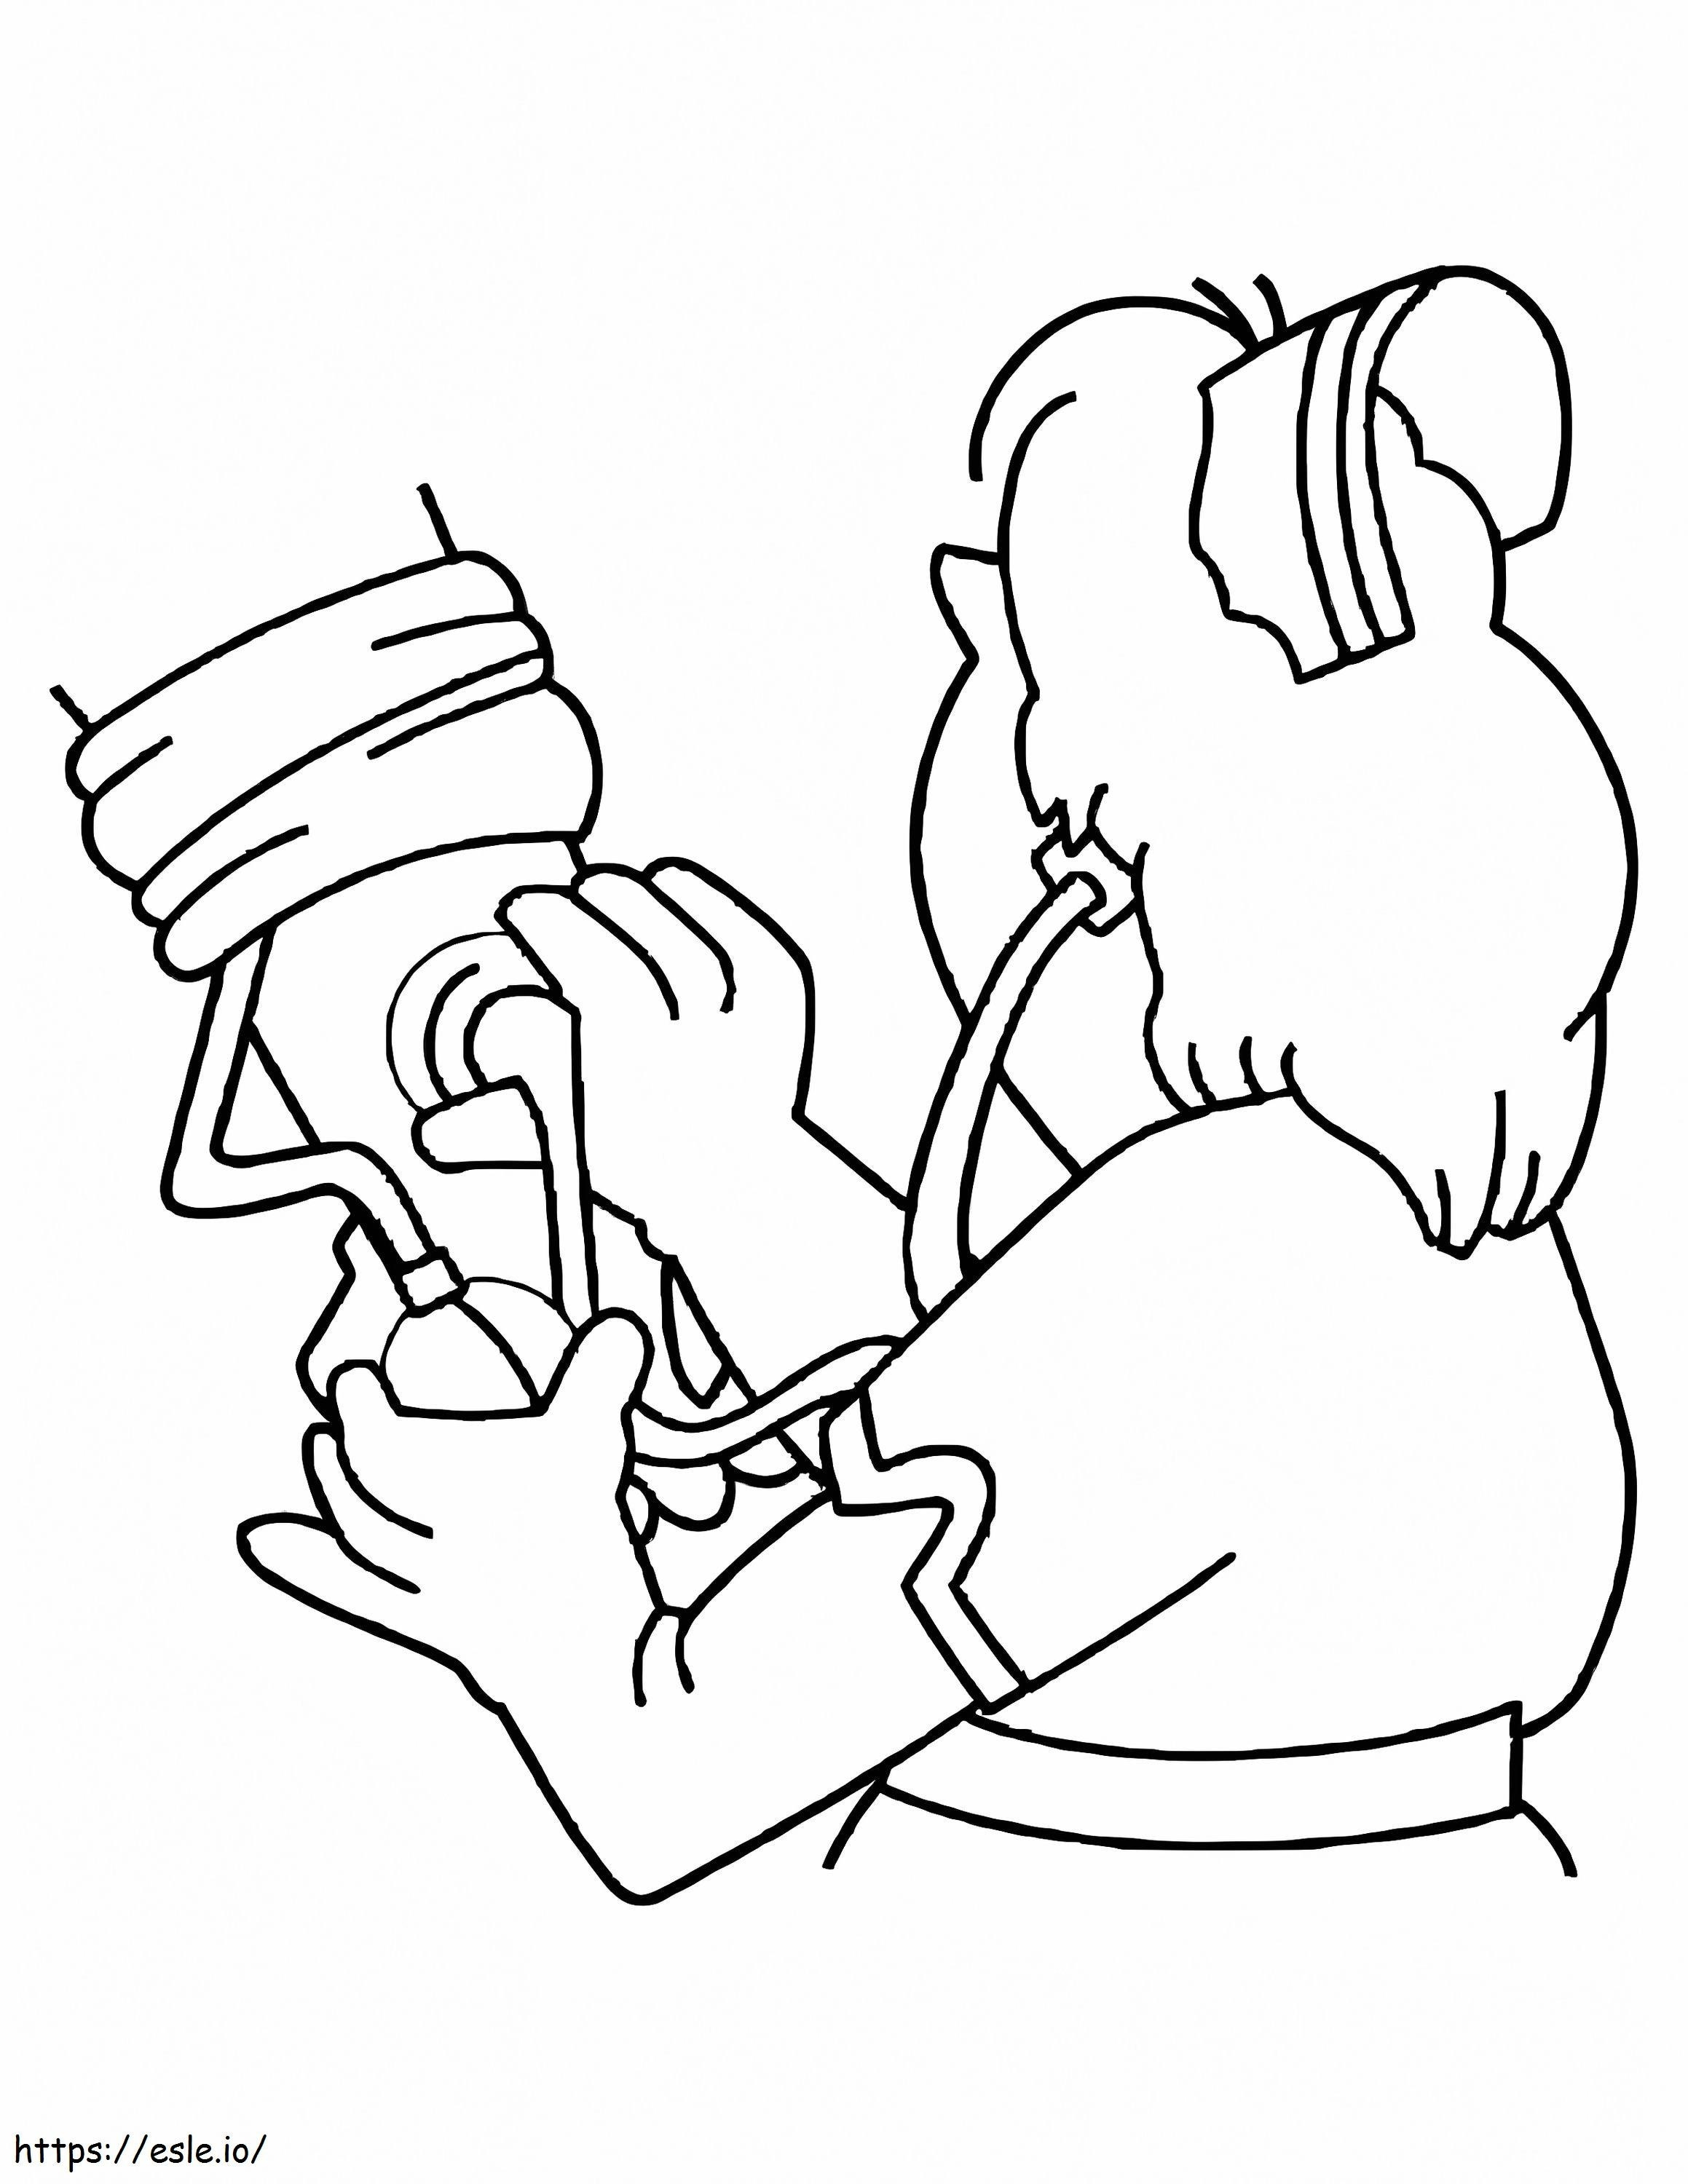 Nurse Is Working coloring page